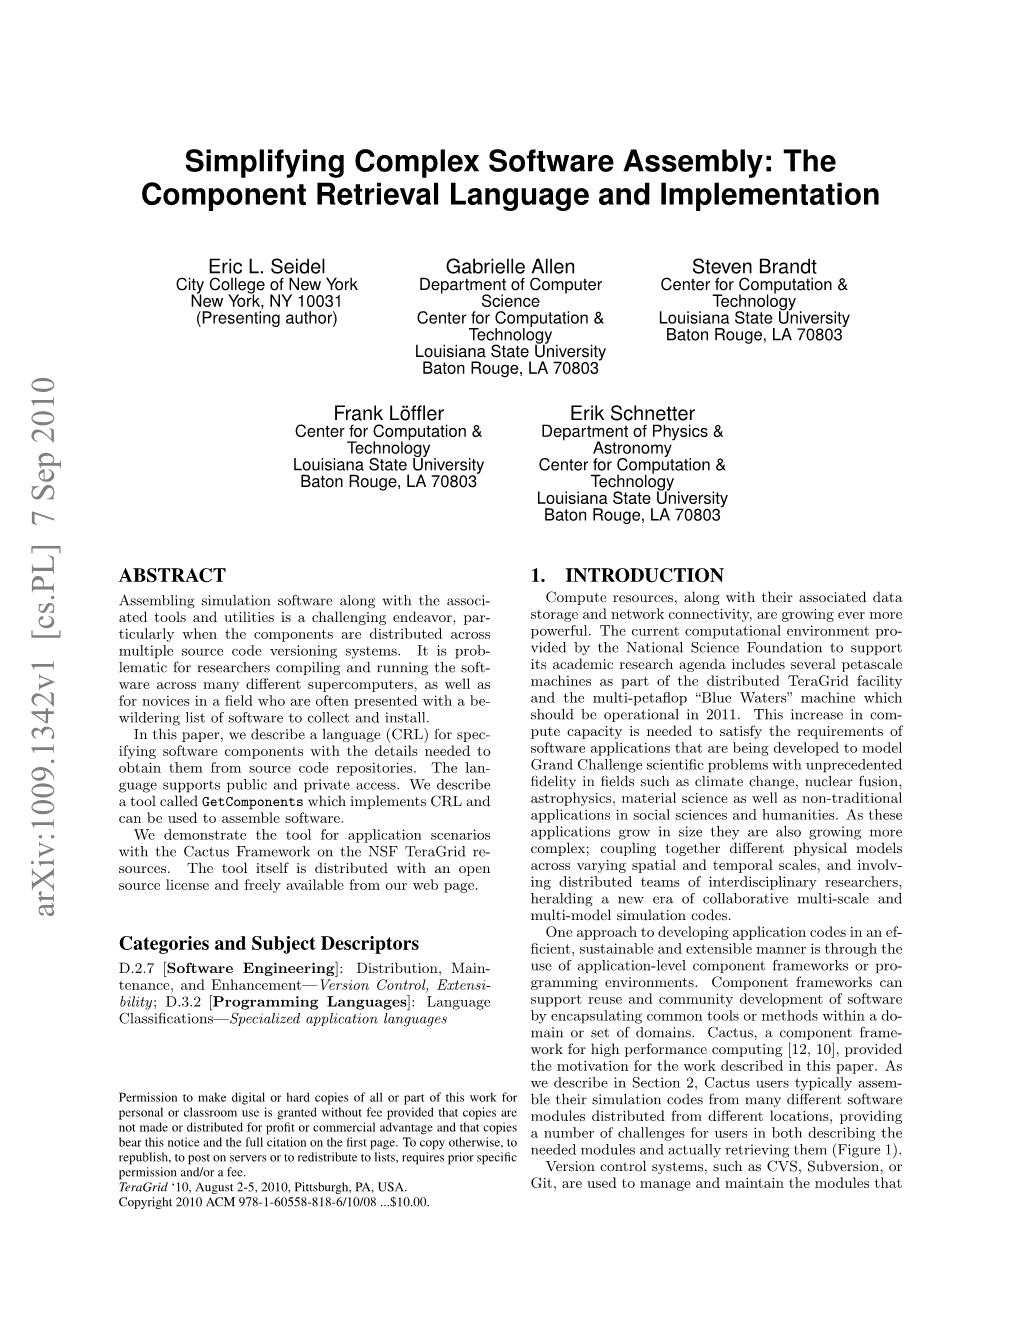 Simplifying Complex Software Assembly: the Component Retrieval Language and Implementation